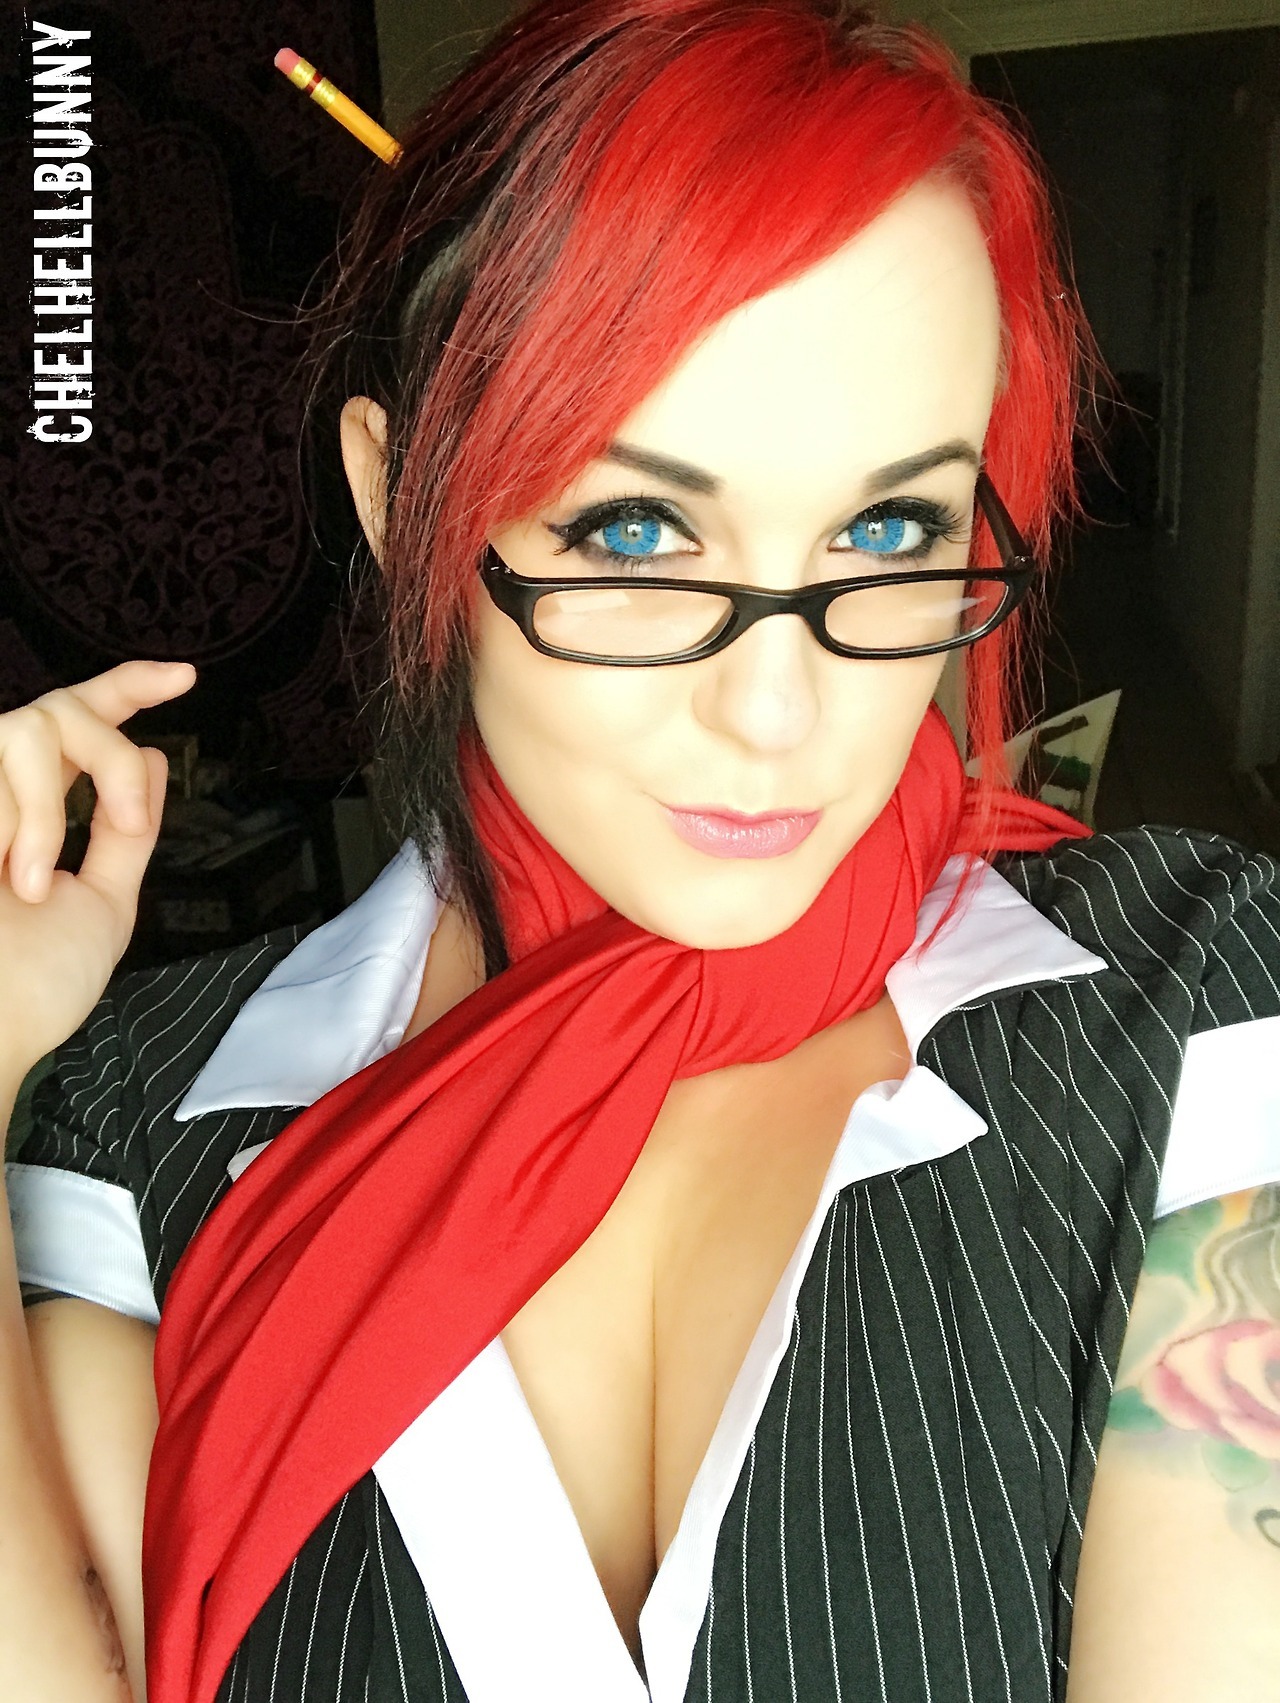 thechelhellbunny: Headmistress Fiora cosplay (purchased for me by a fan from my amazon